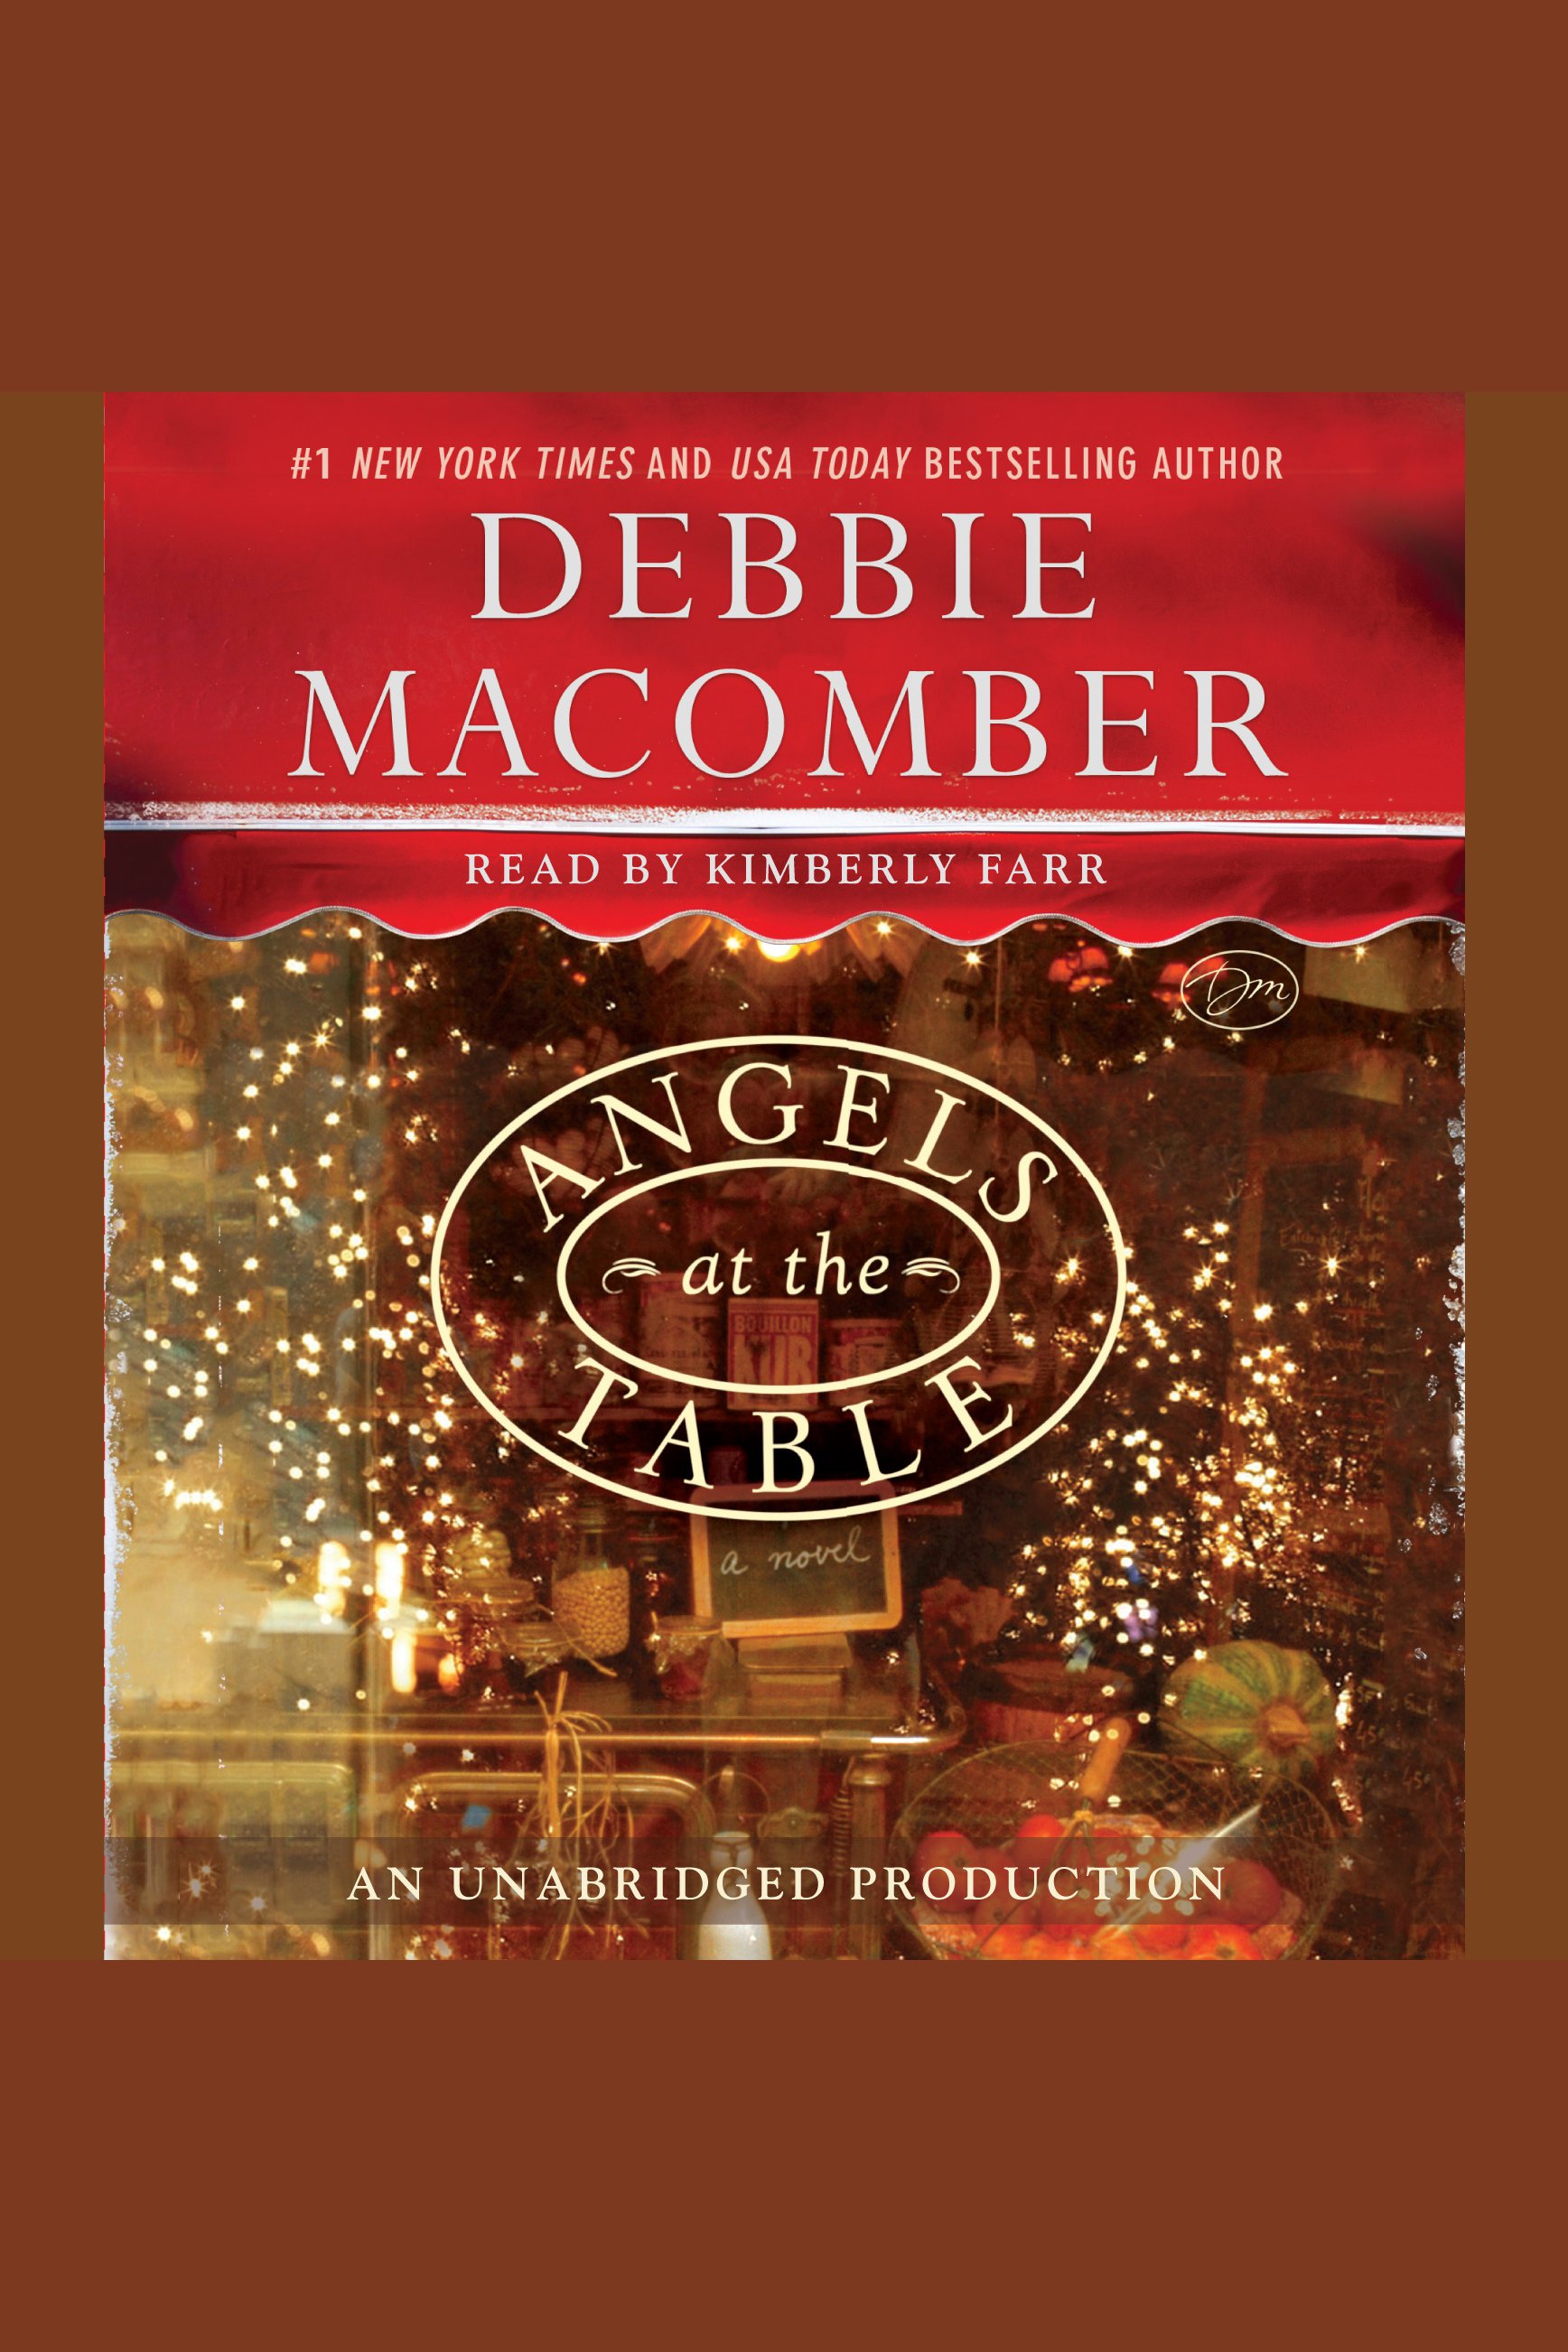 Angels at the table cover image